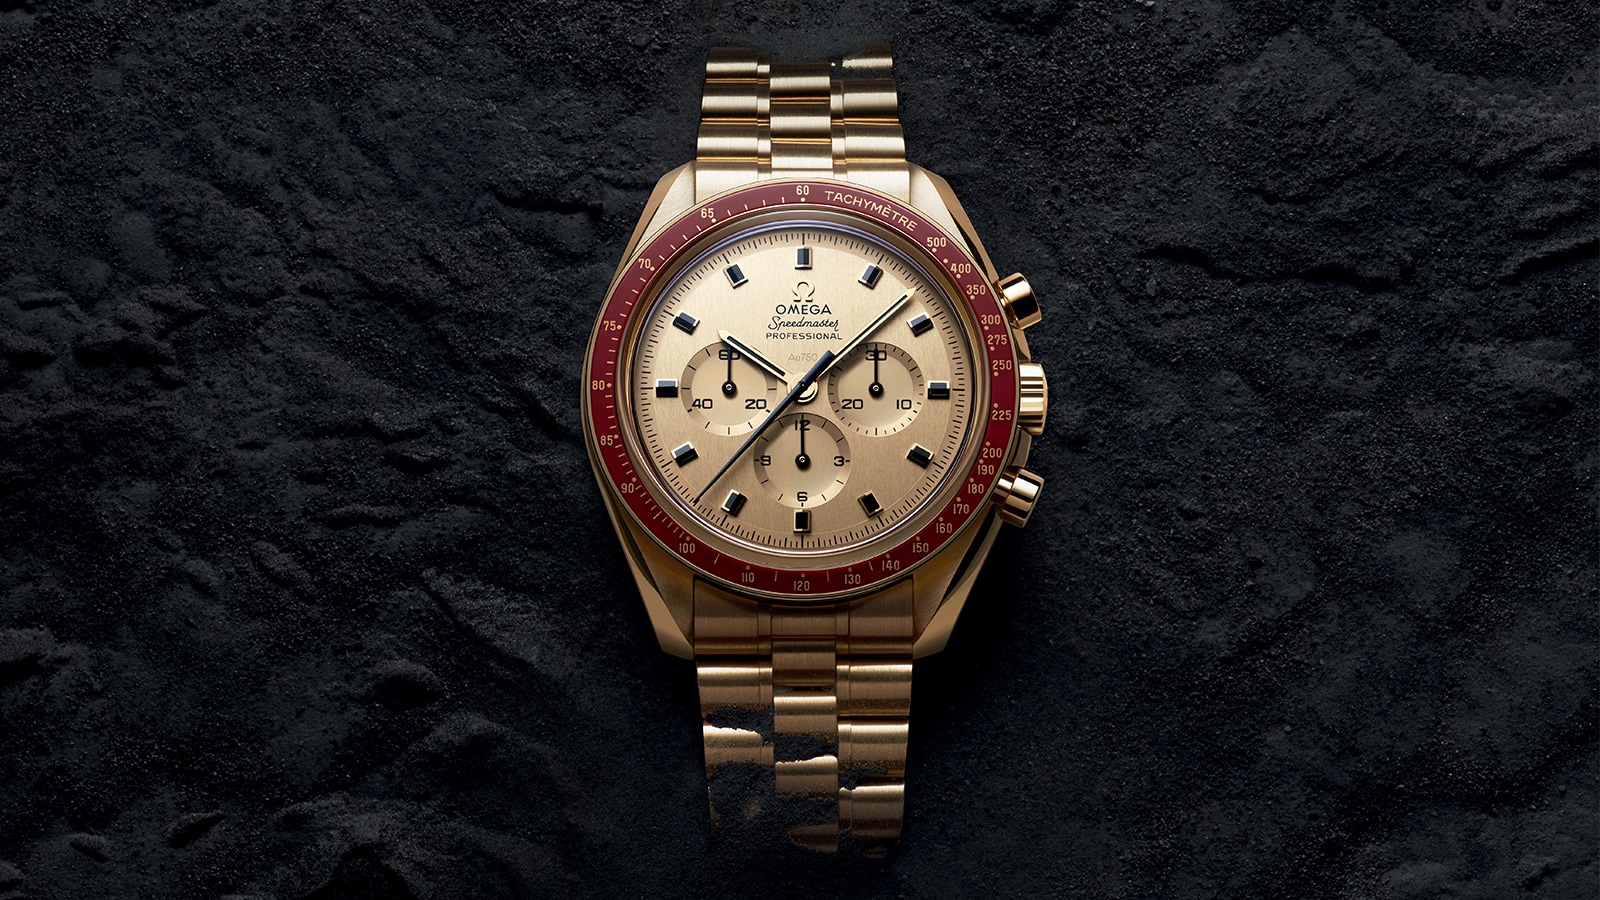 How To Tell A Fake Rolex Daytona